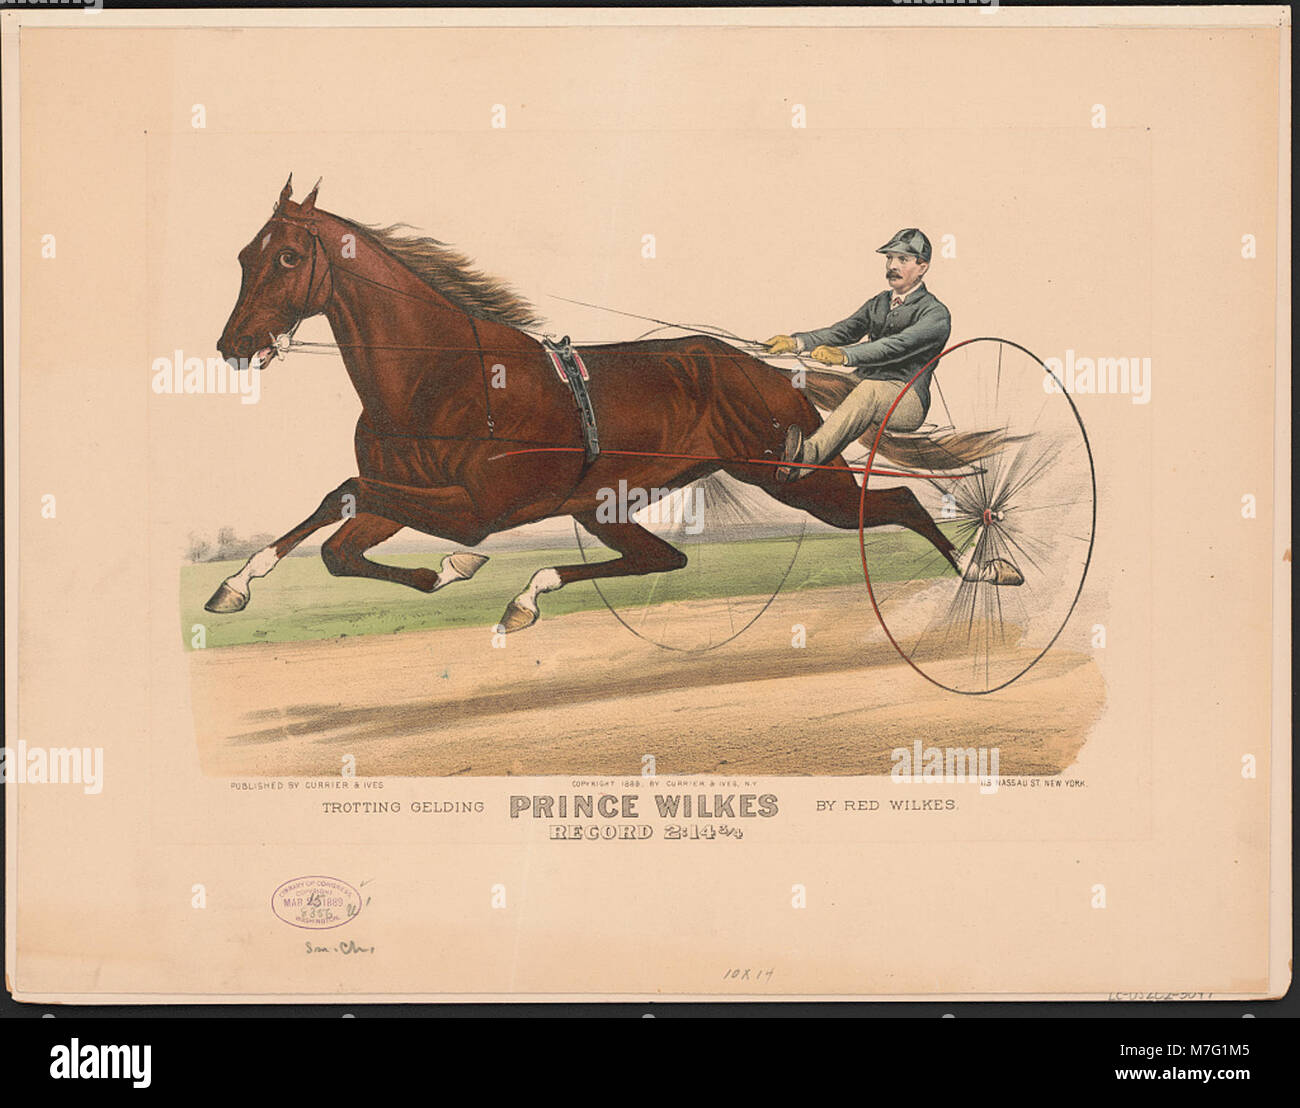 Trotting gelding Prince Wilkes by Red Wilkes- record 2-14 3-4 LCCN2002697384 Stock Photo